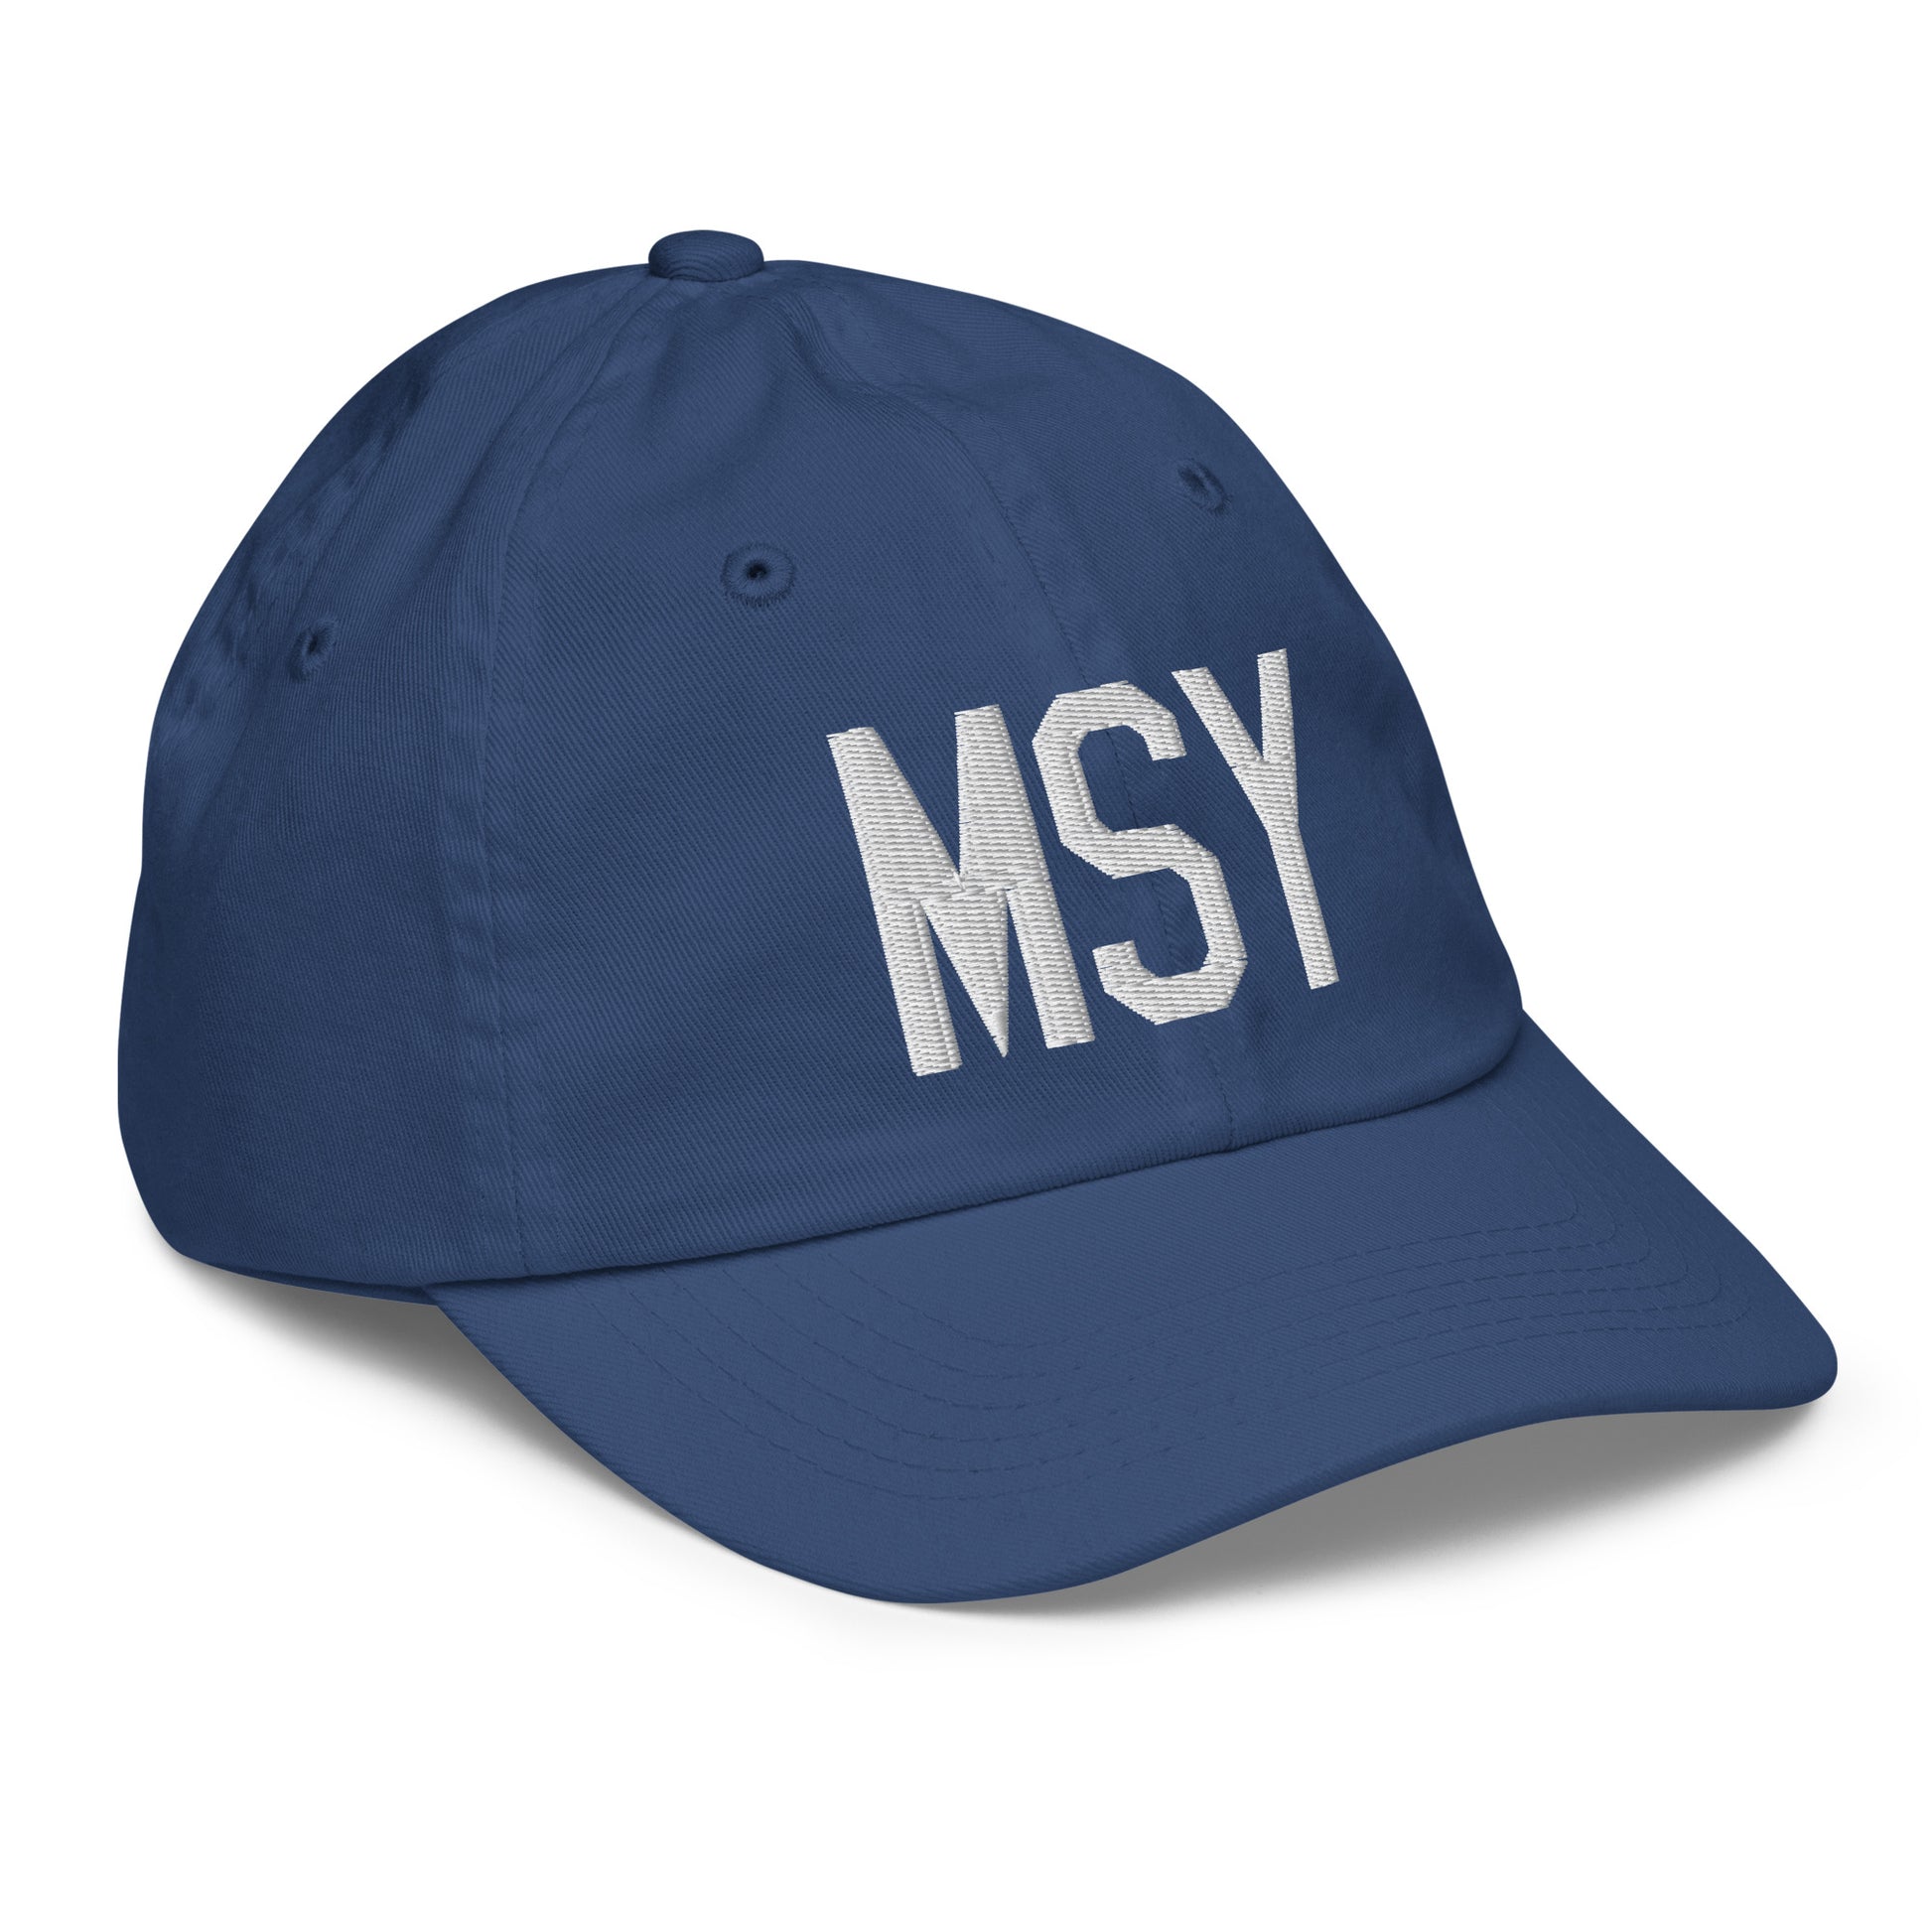 Airport Code Kid's Baseball Cap - White • MSY New Orleans • YHM Designs - Image 21